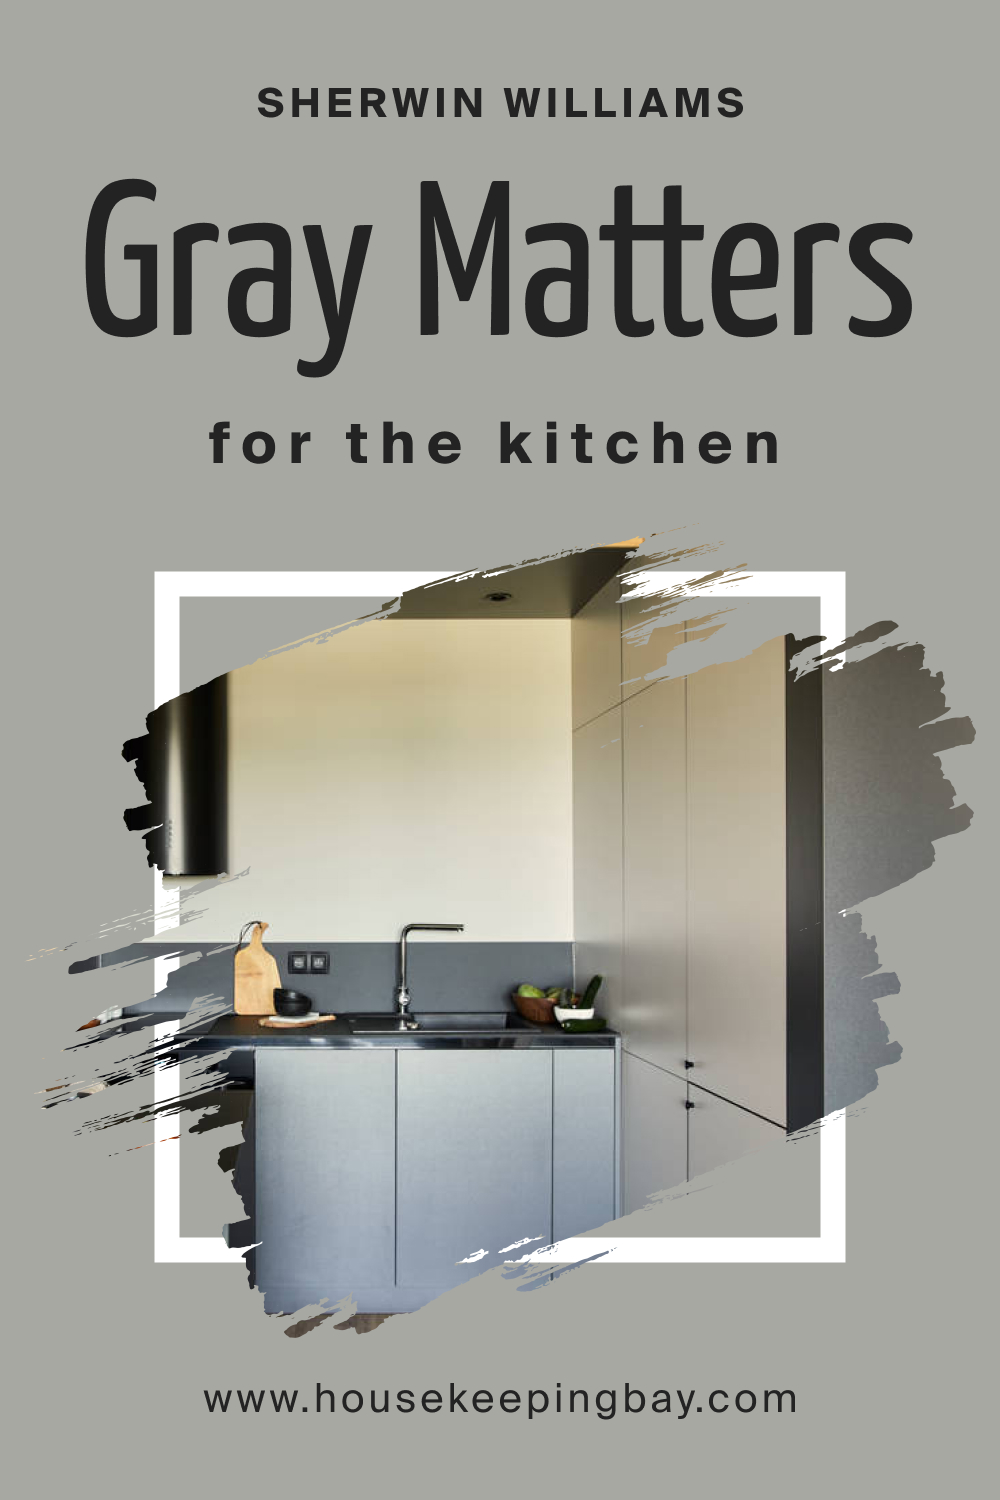 Sherwin Williams. Gray Matters SW 7066 For the Kitchen